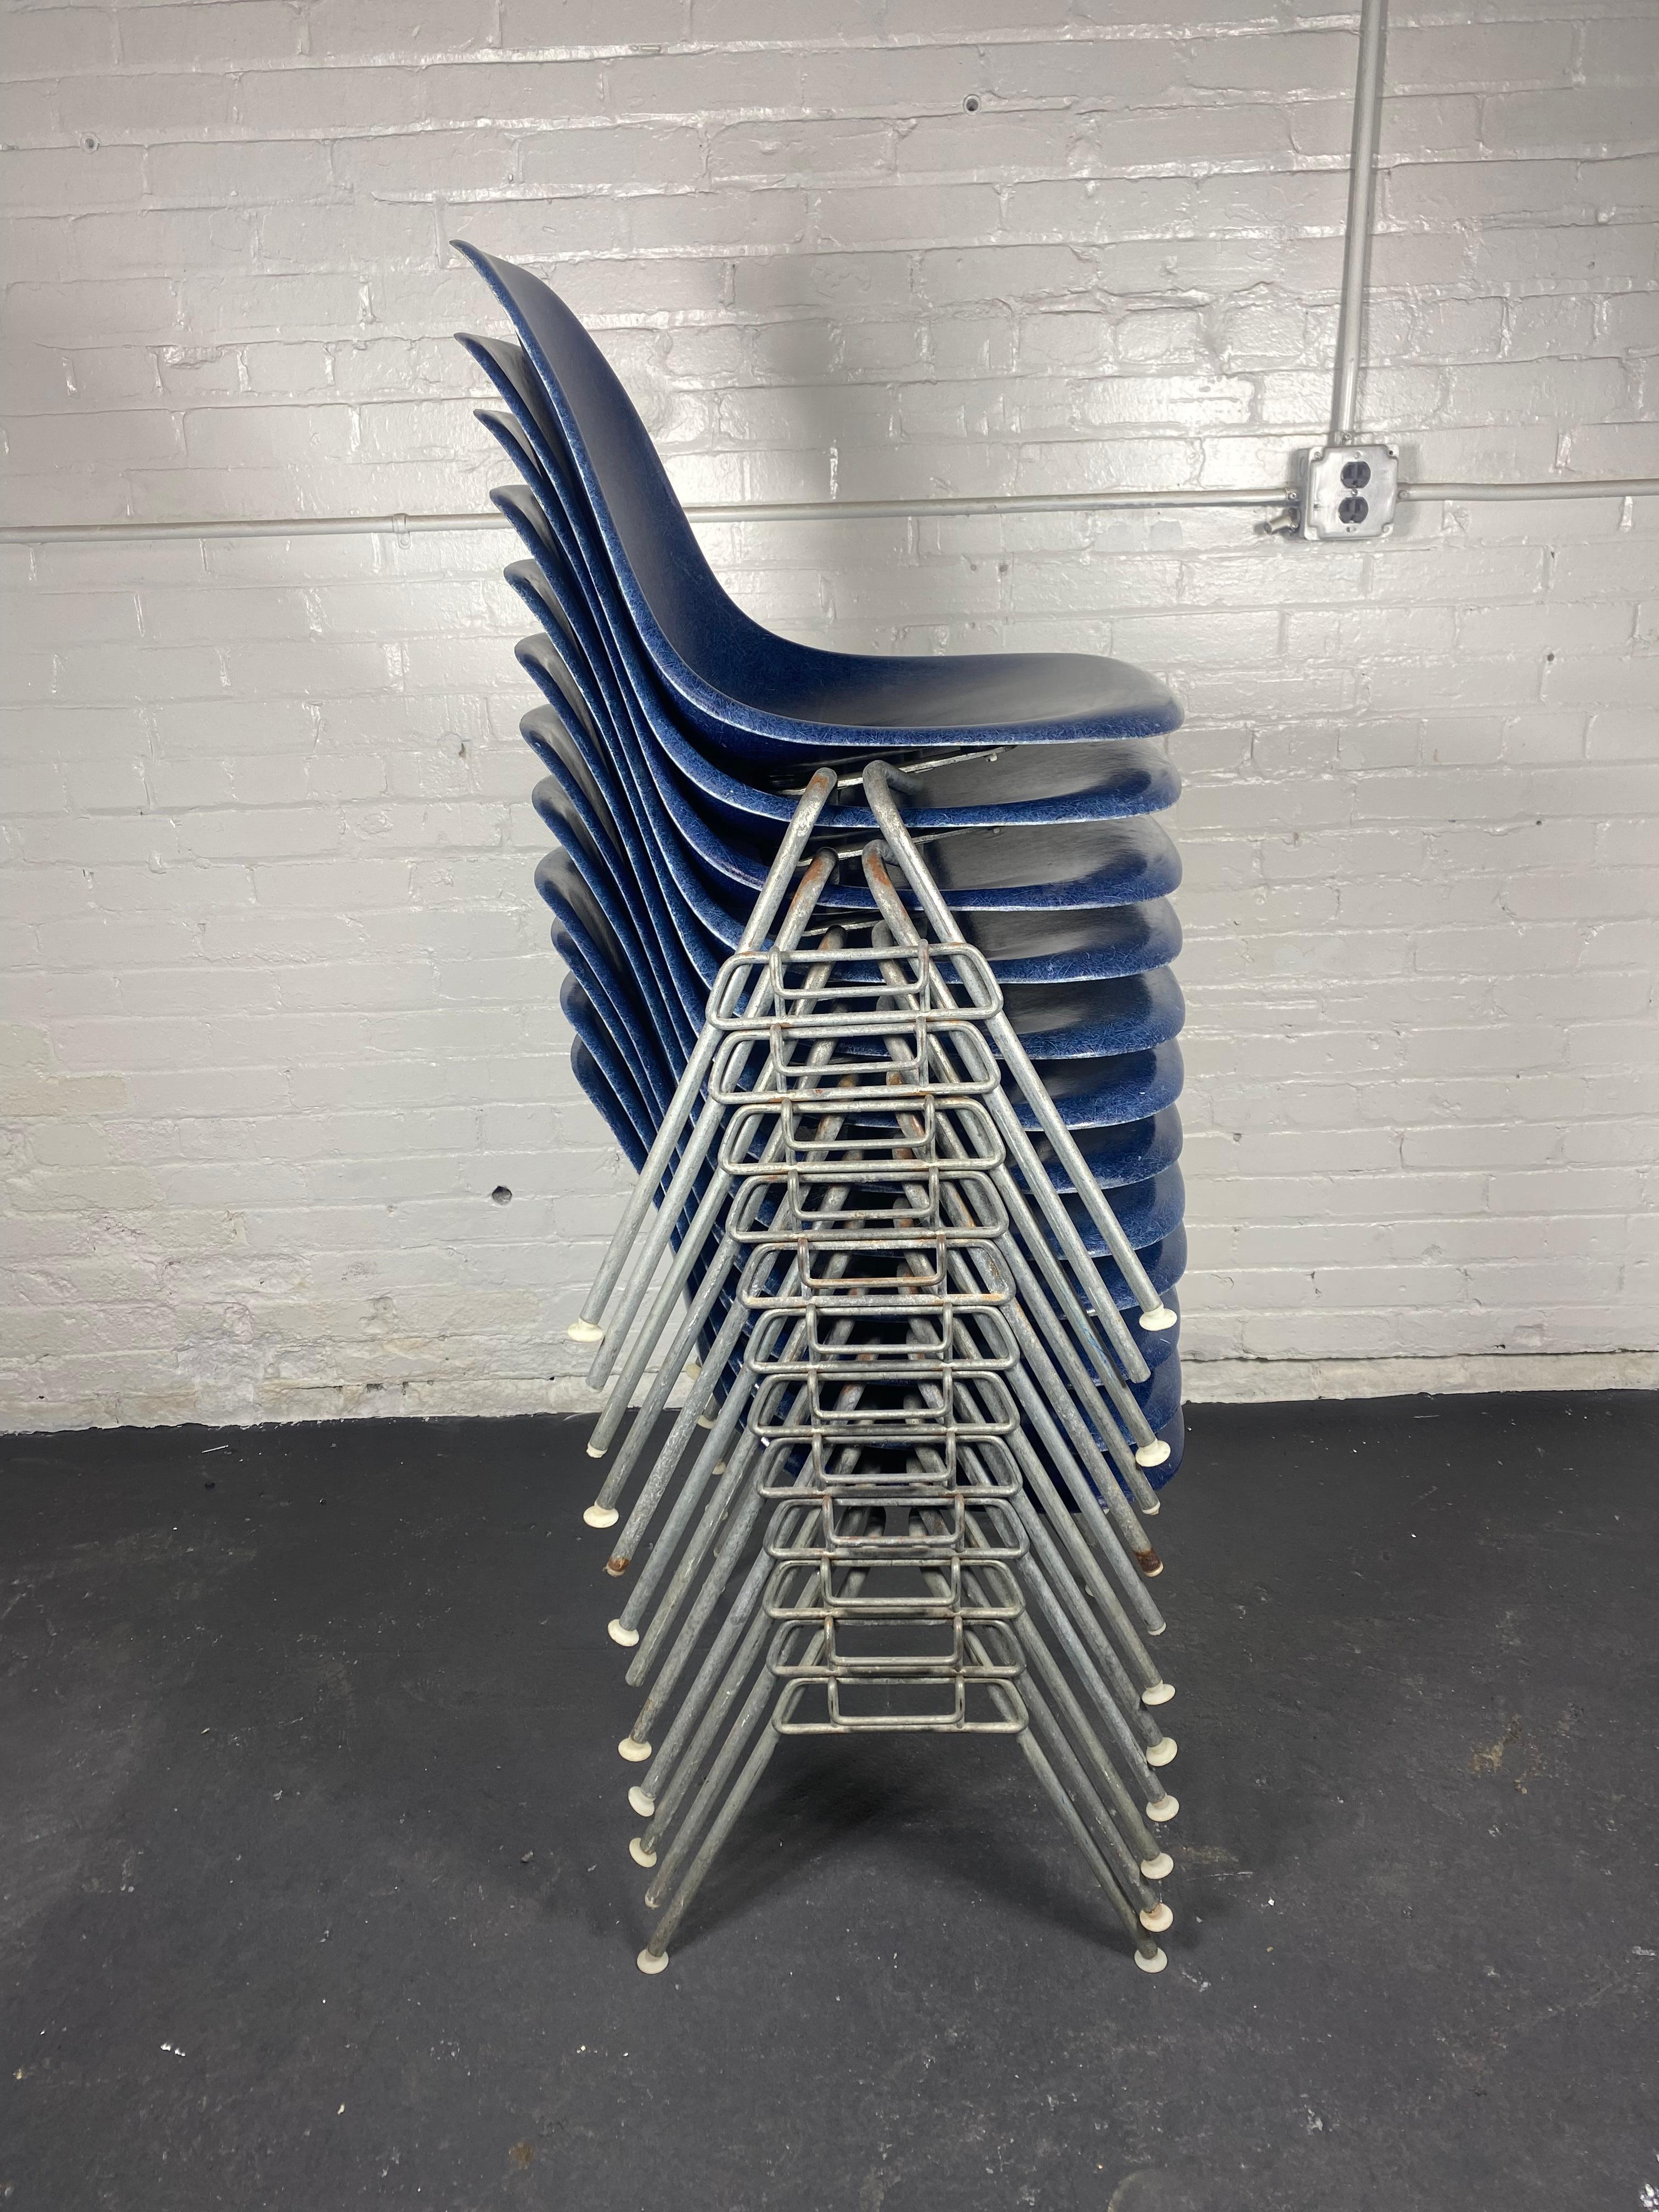 One of 12 stackable dining room chairs by Charles & Ray Eames for Herman Miller, manufactured in midcentury, 1960s.
The chairs are labeled on the underside of the seats with 'herman miller' and stamped .Stunning set.. Rare color !  Ultramarine Blue 